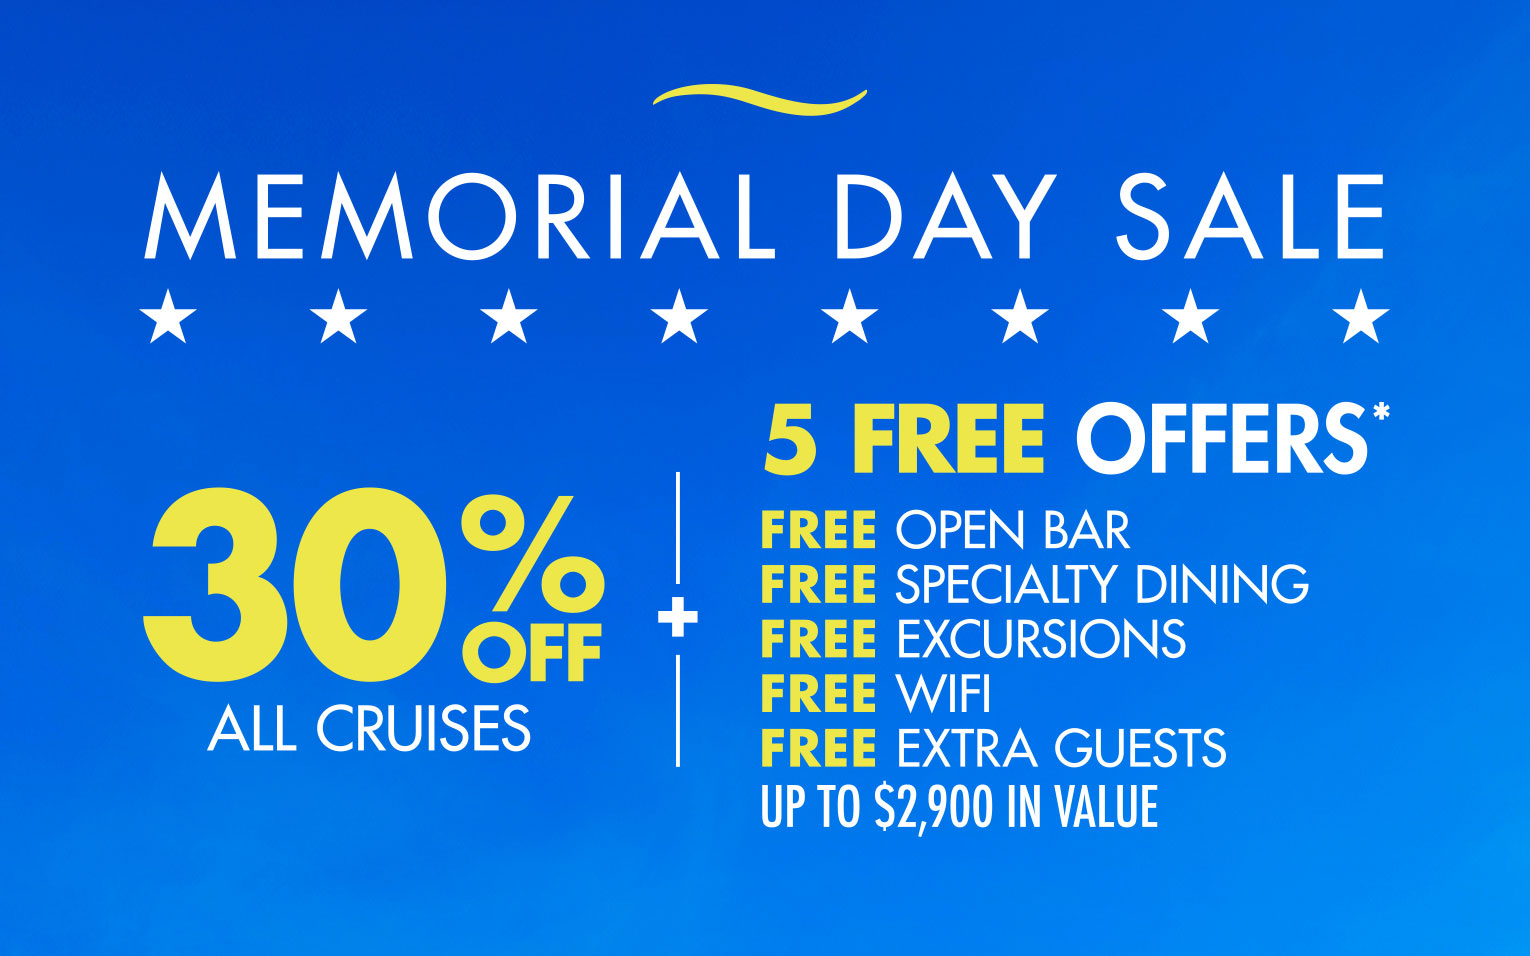 Memorial Day Sale - Get 30% OFF + 5 FREE at Sea Offers